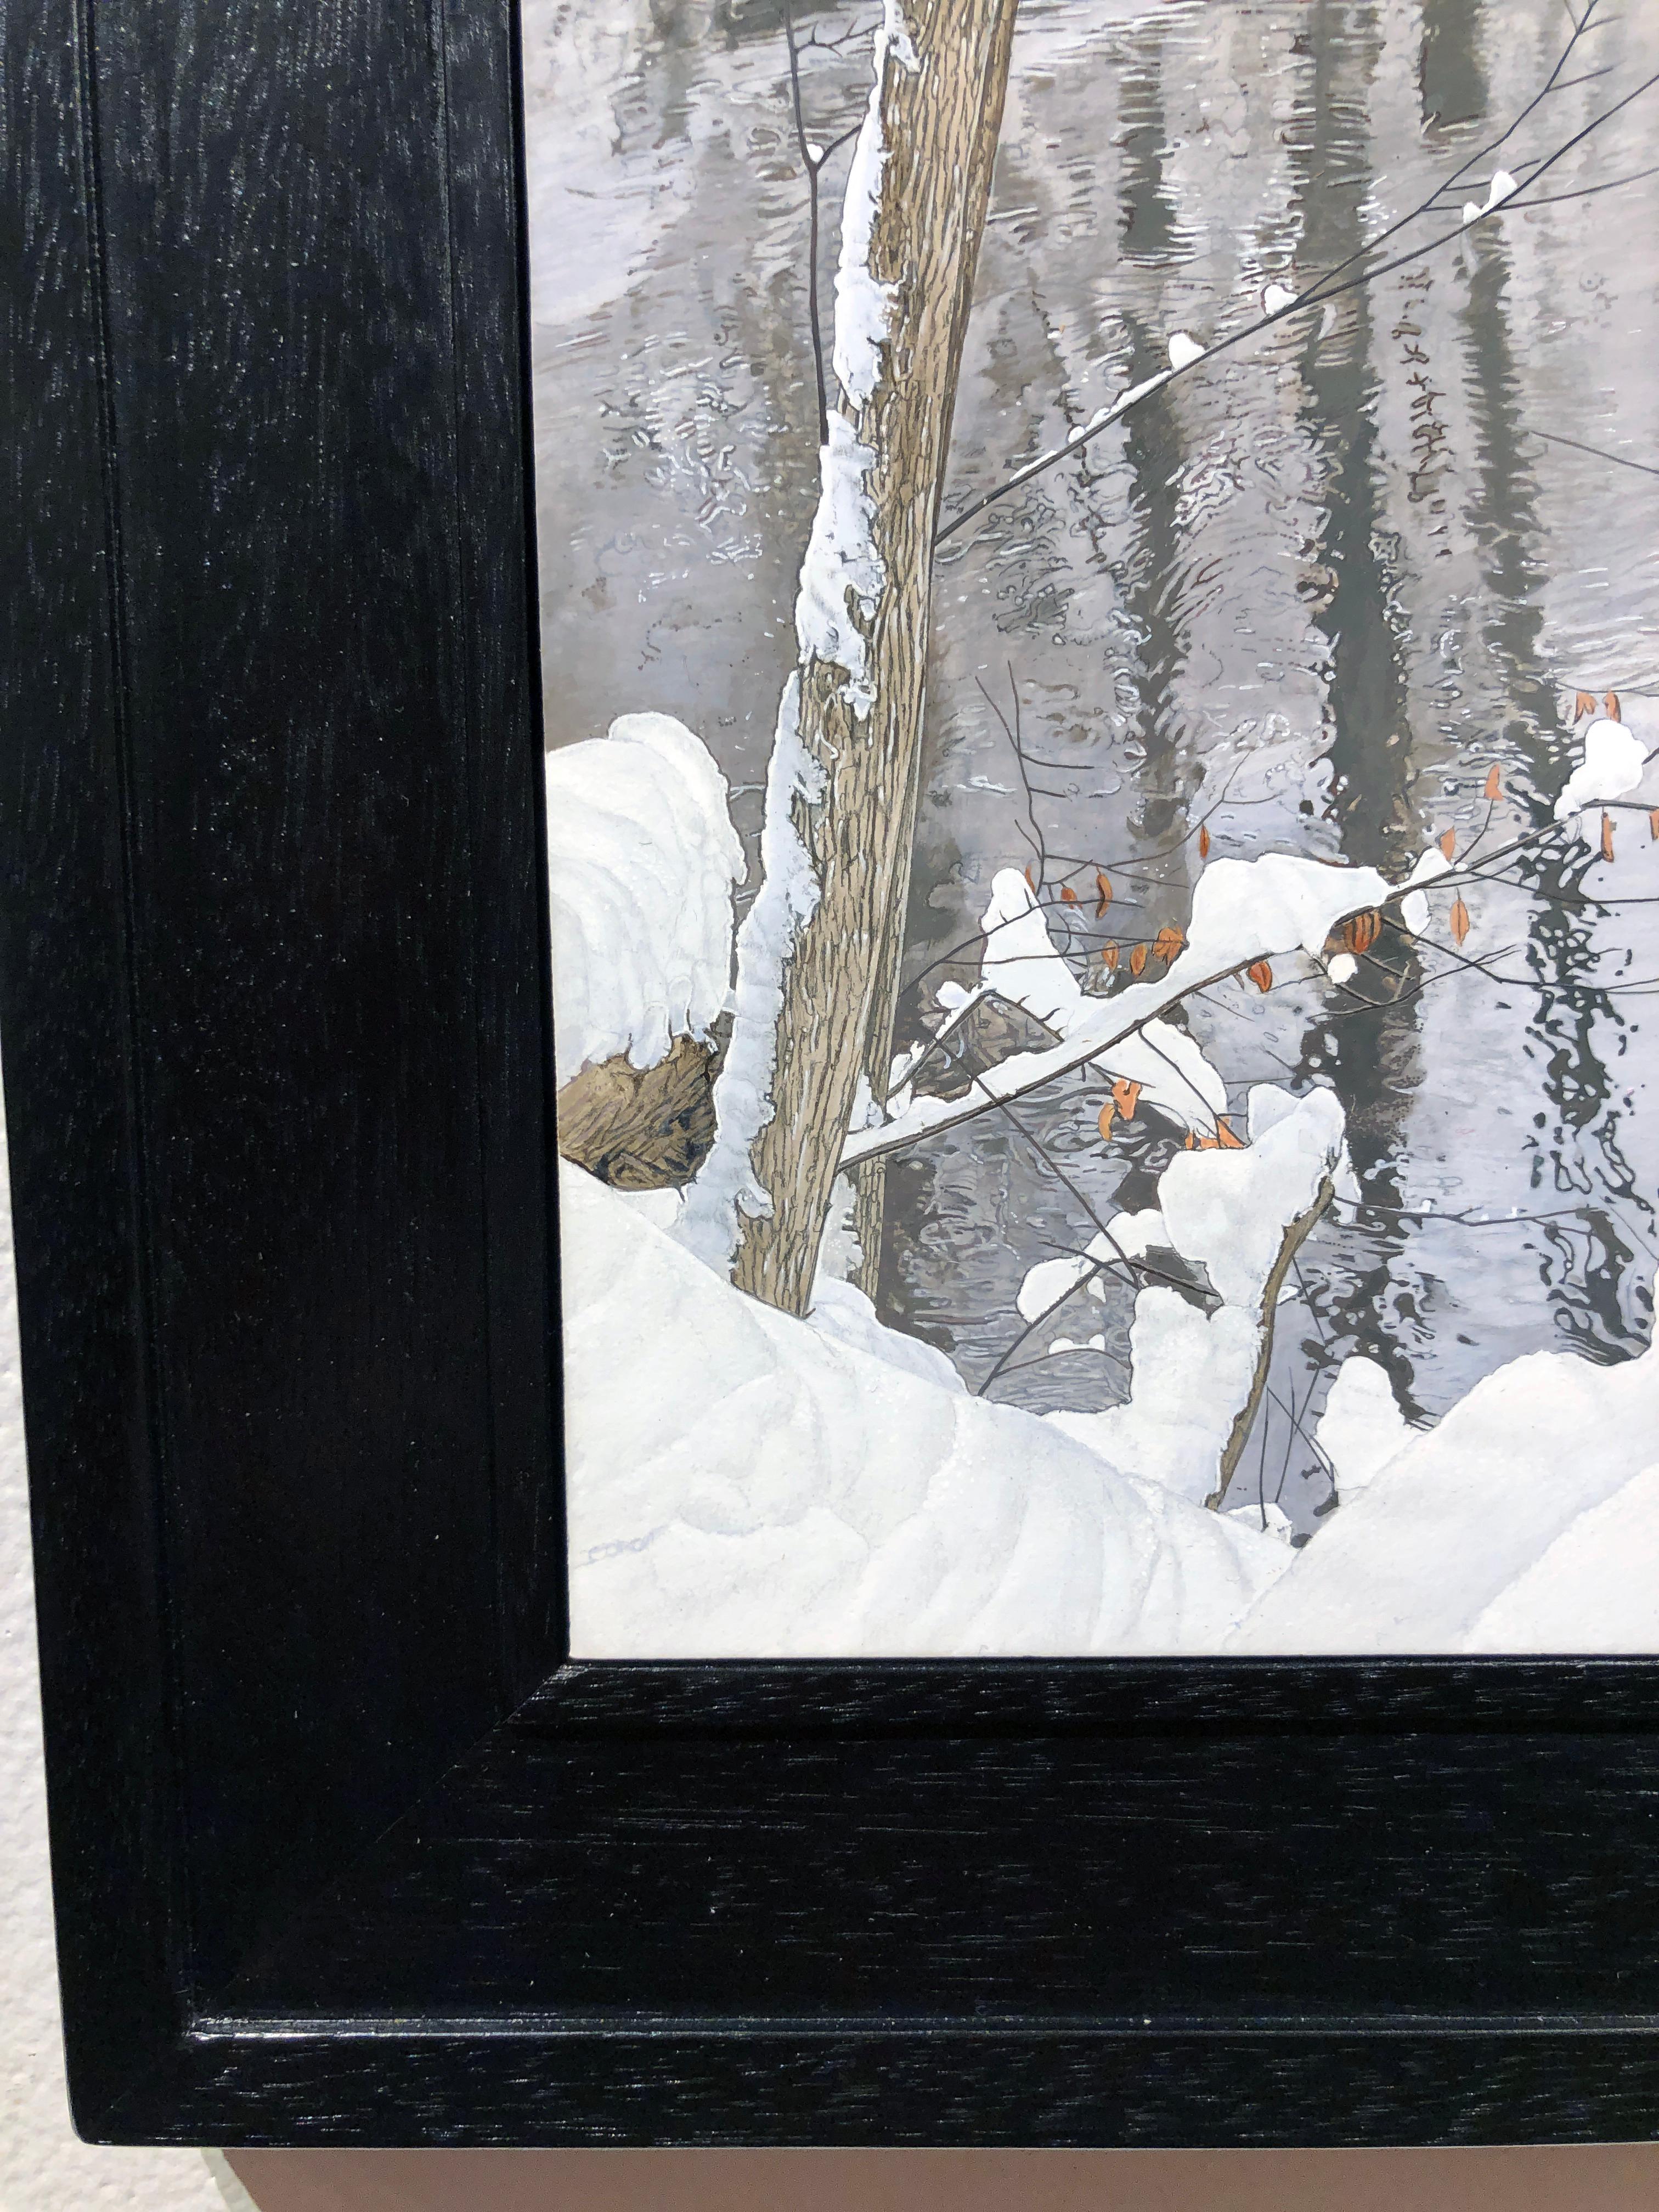 Chickadee at Hasler Creek - Photorealistic Painting of Bird in a Winter Scene 5